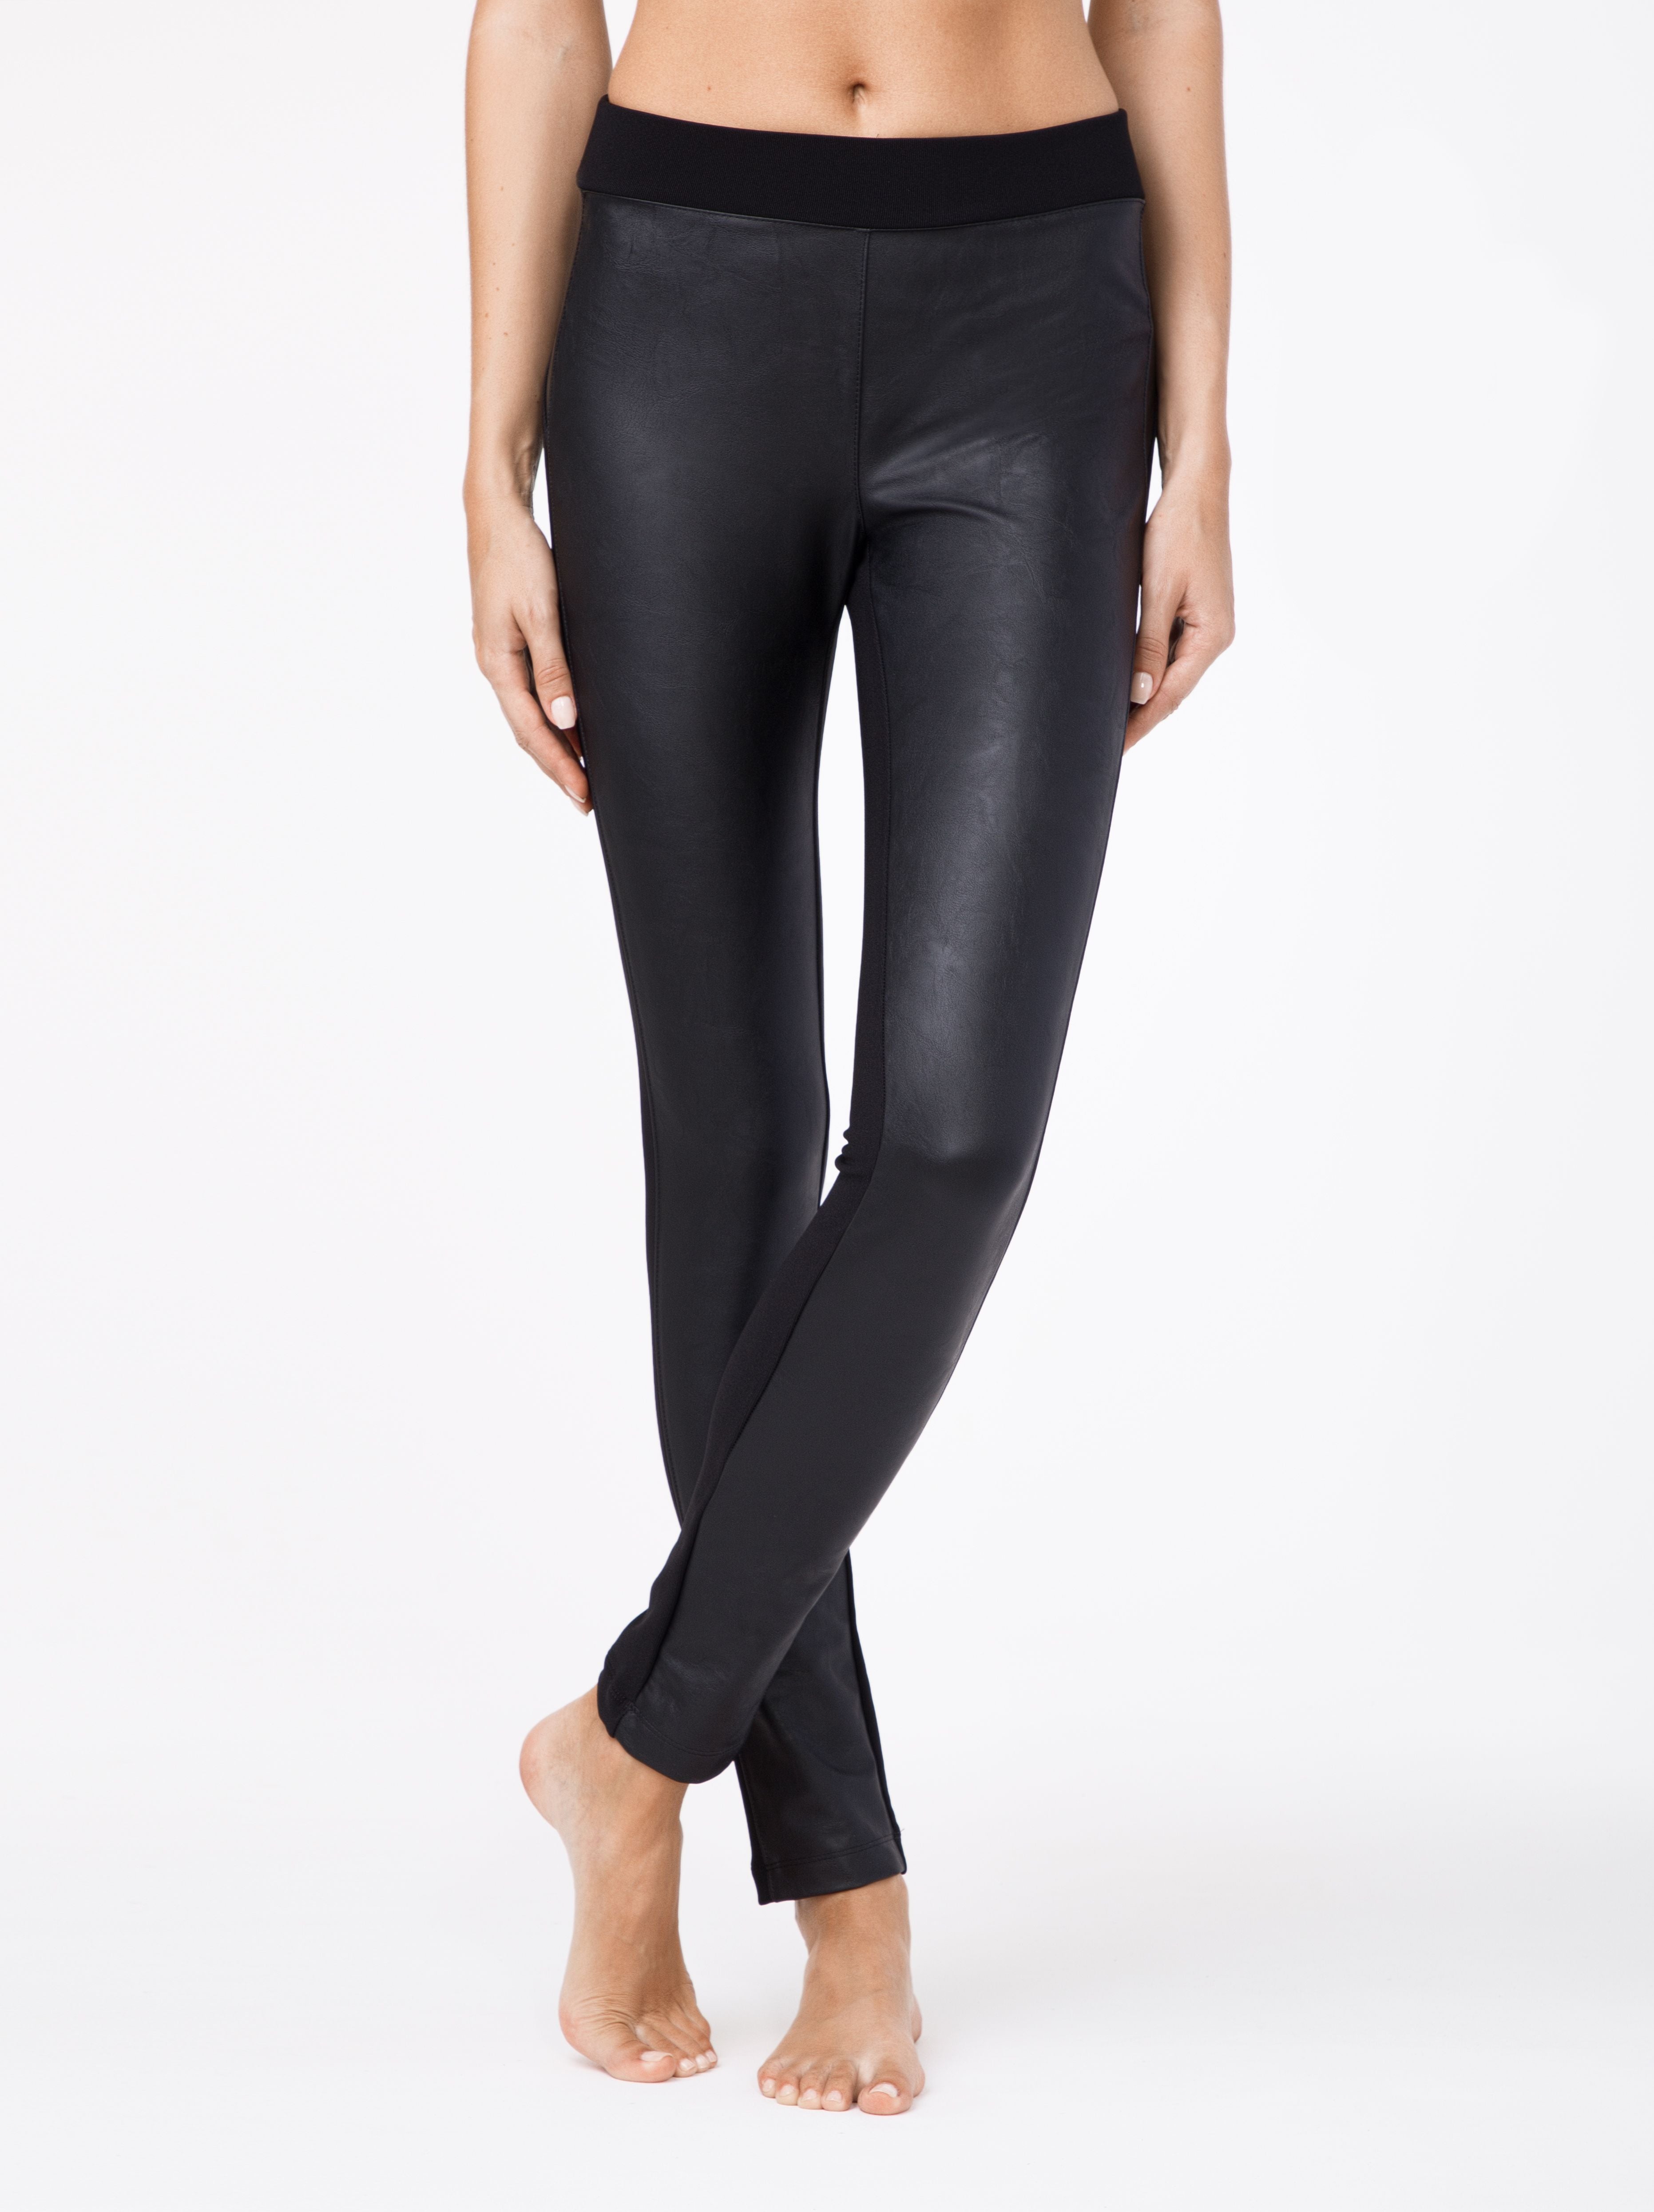 black faux leather leggings Mystery by Conte Elegant